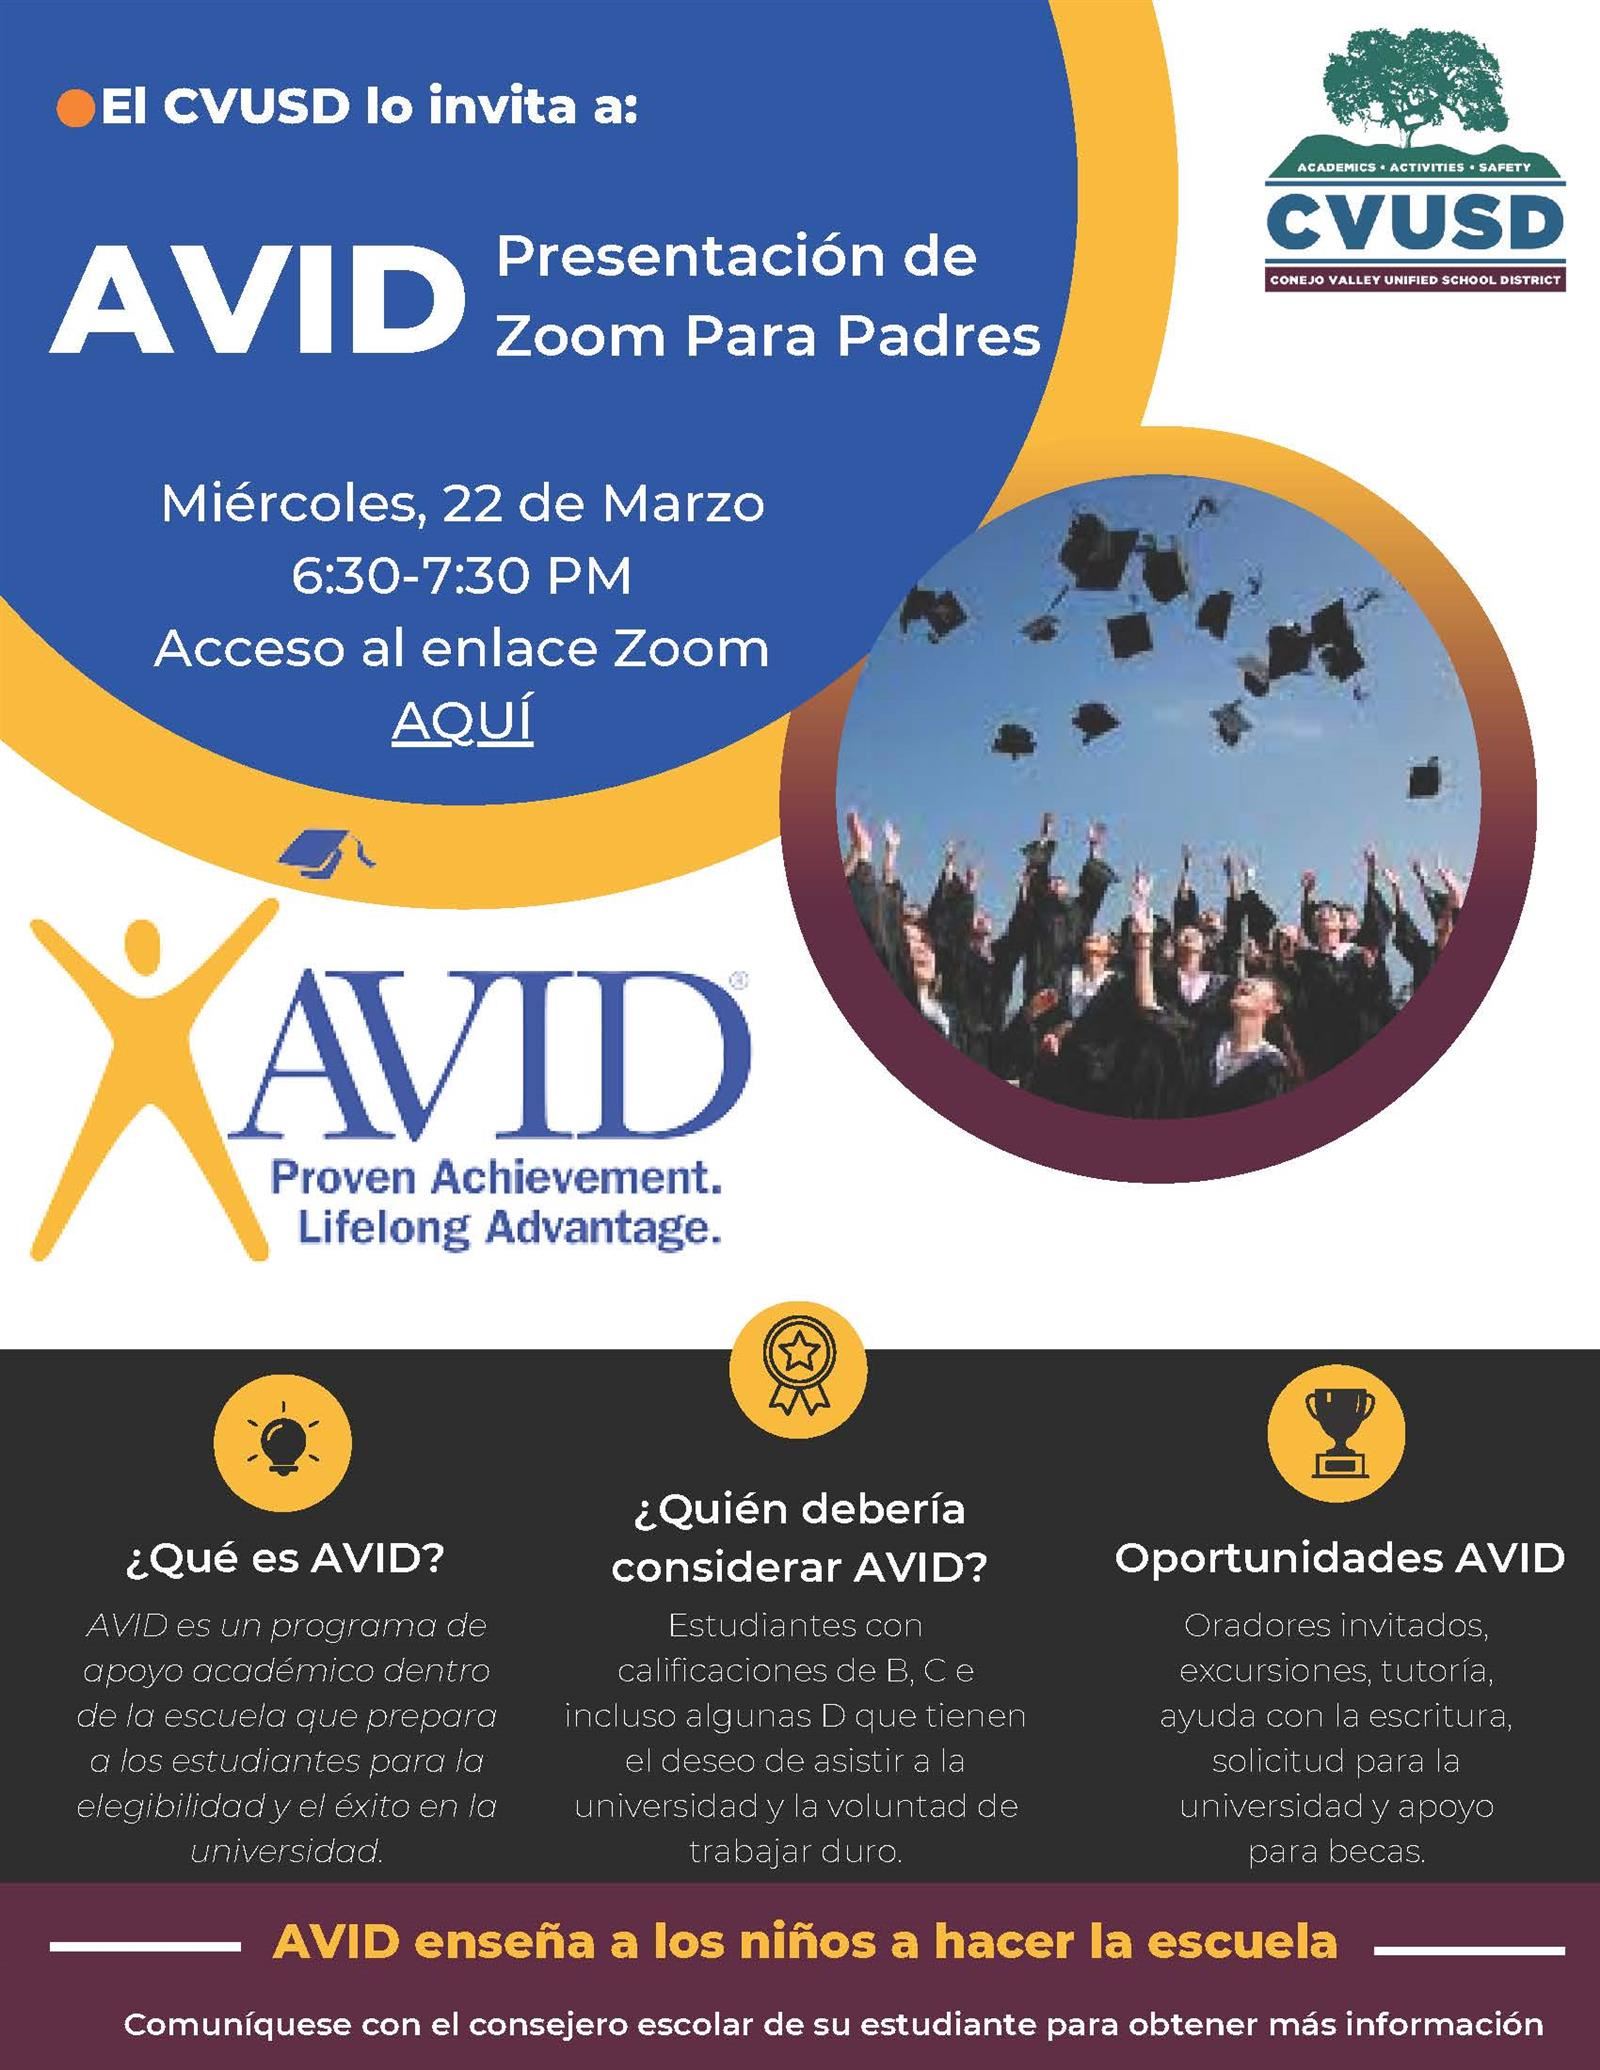 Middle and High School Families: Learn More About the AVID Program at the Upcoming Information Night